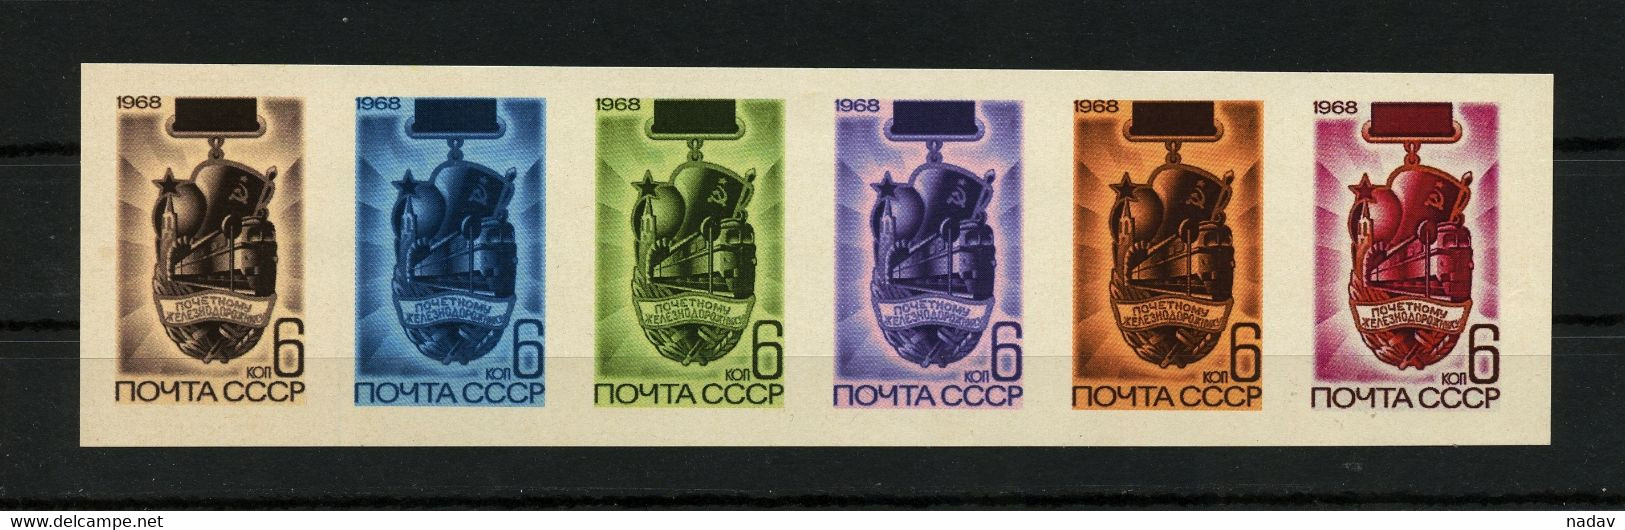 Russia & USSR-1968, Project -unreleased, Reproduction - MNH** - Prove & Ristampe